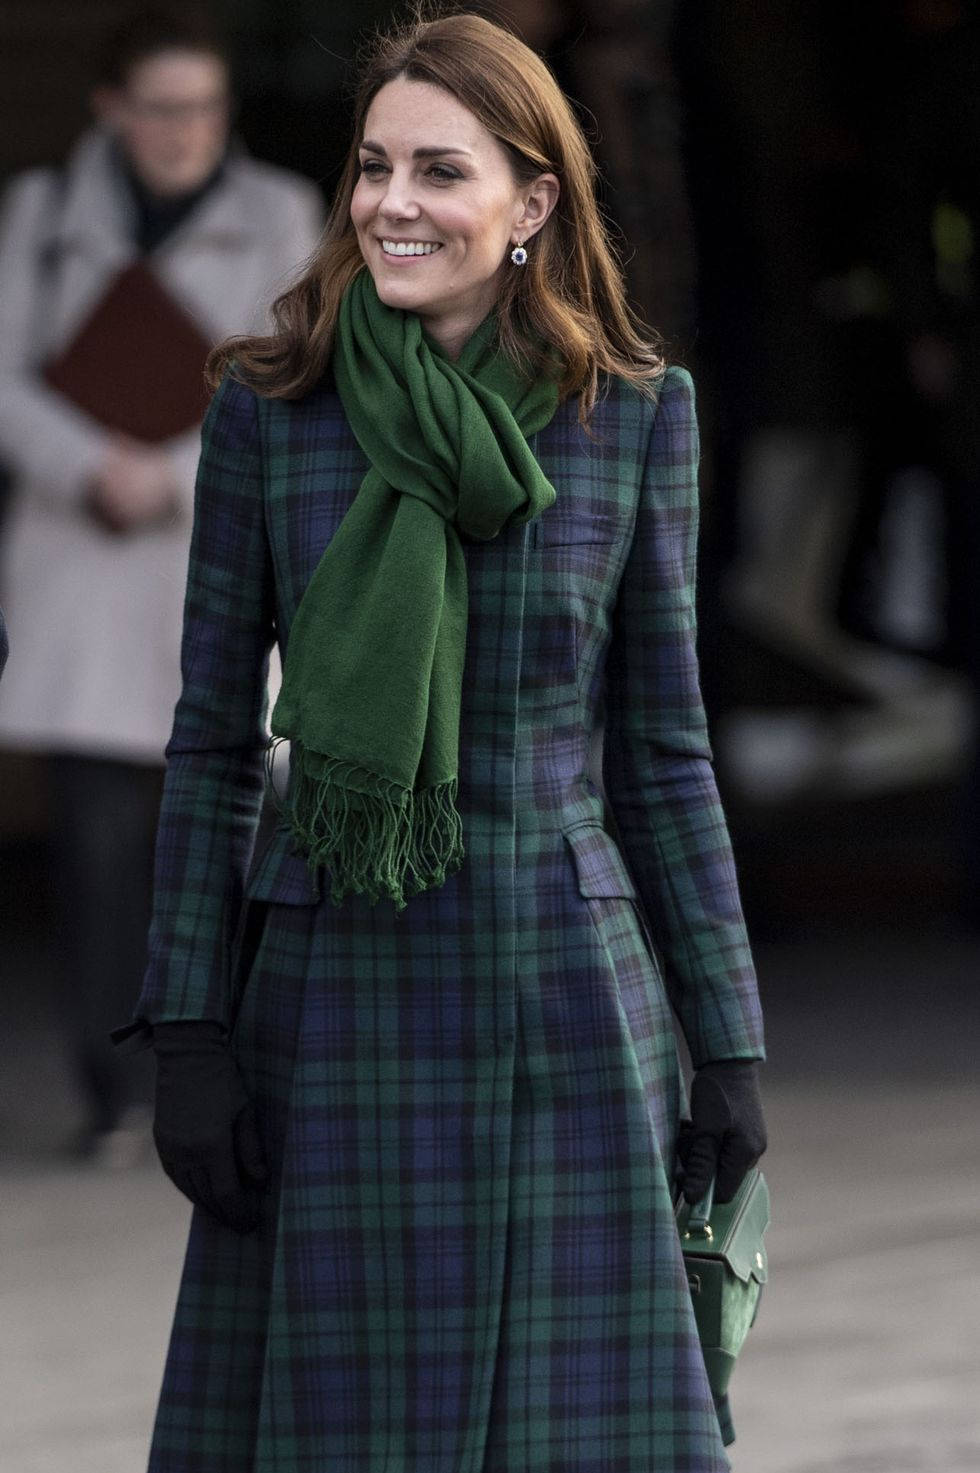 Kate Middleton In Plaid Blue & Green Background